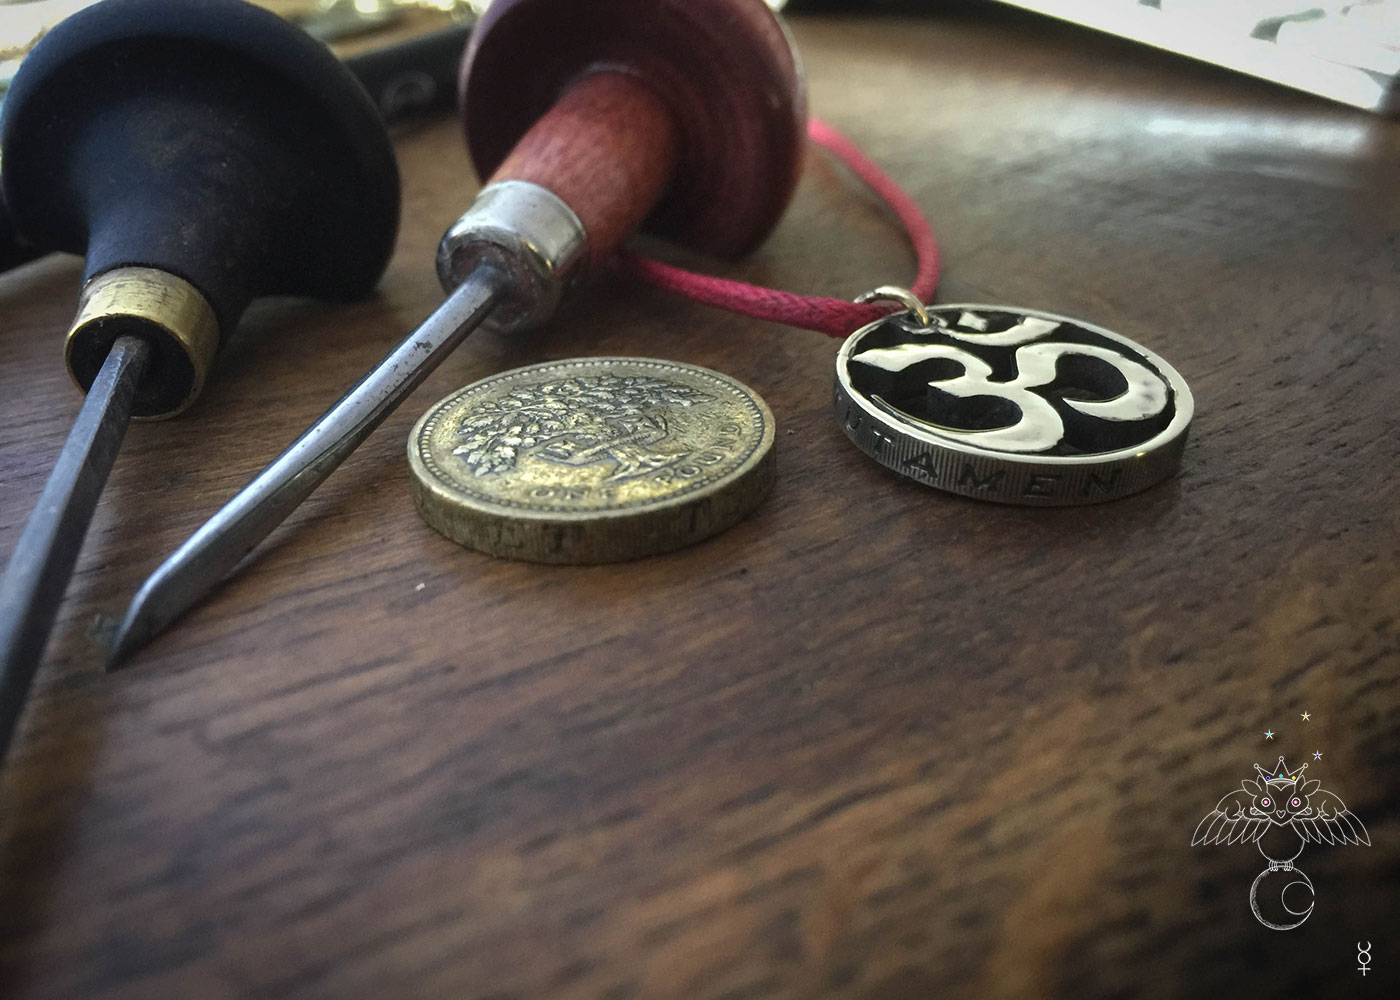 Handcrafted and recycled om coin pendant necklace